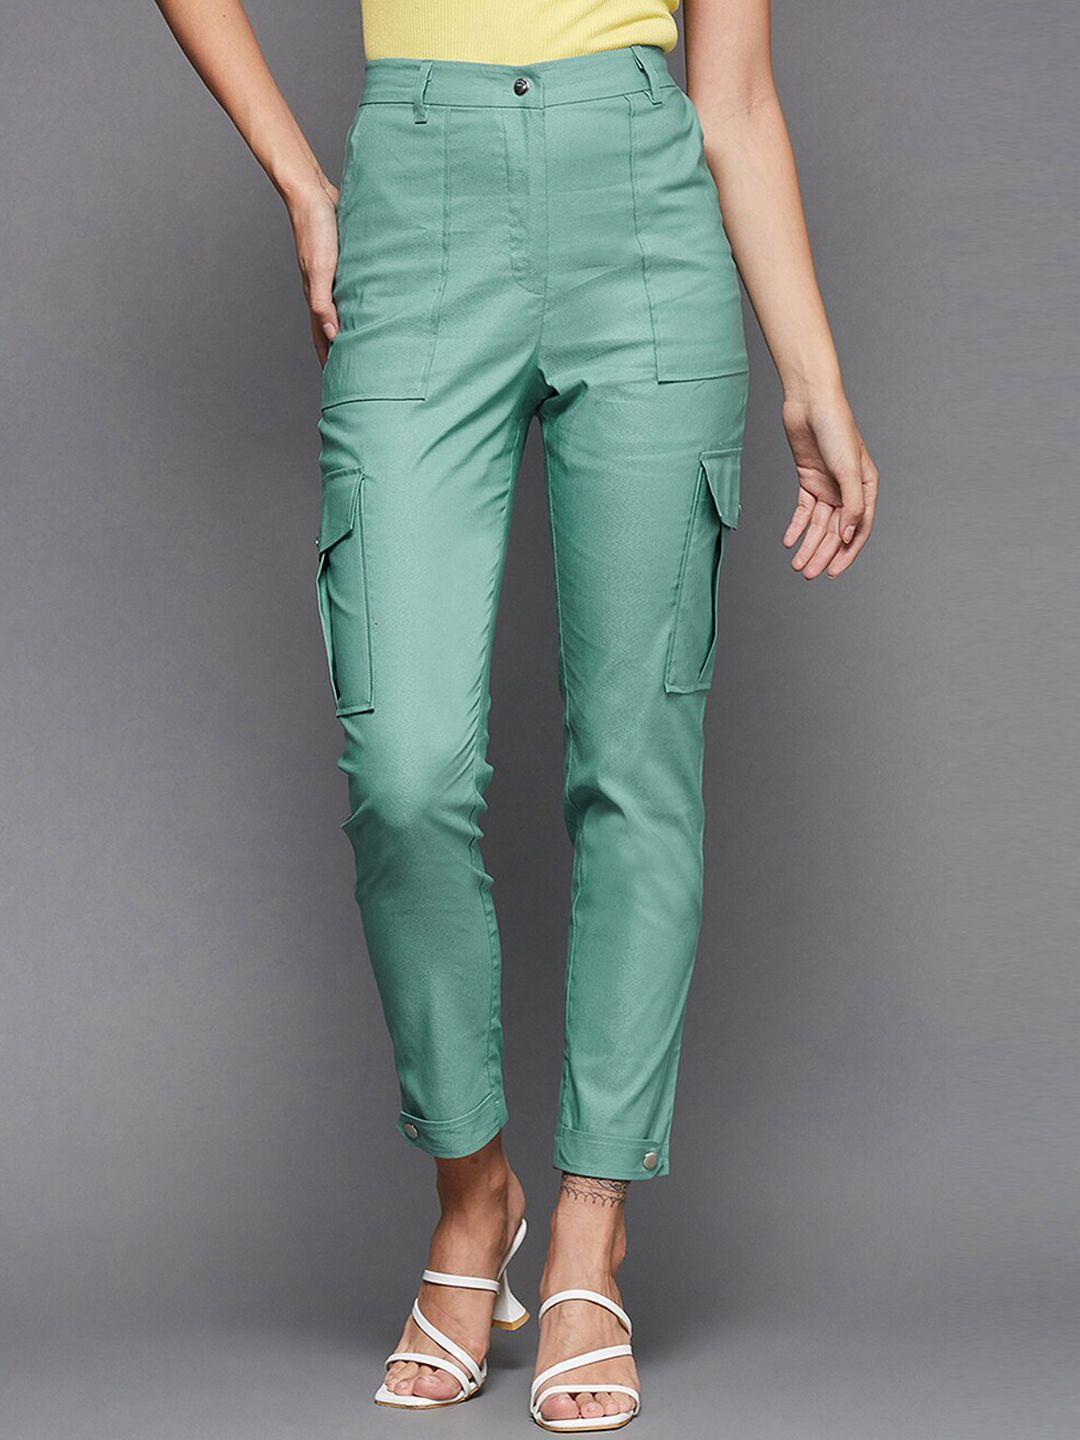 The Roadster Lifestyle Co High Waist Cargo Trousers